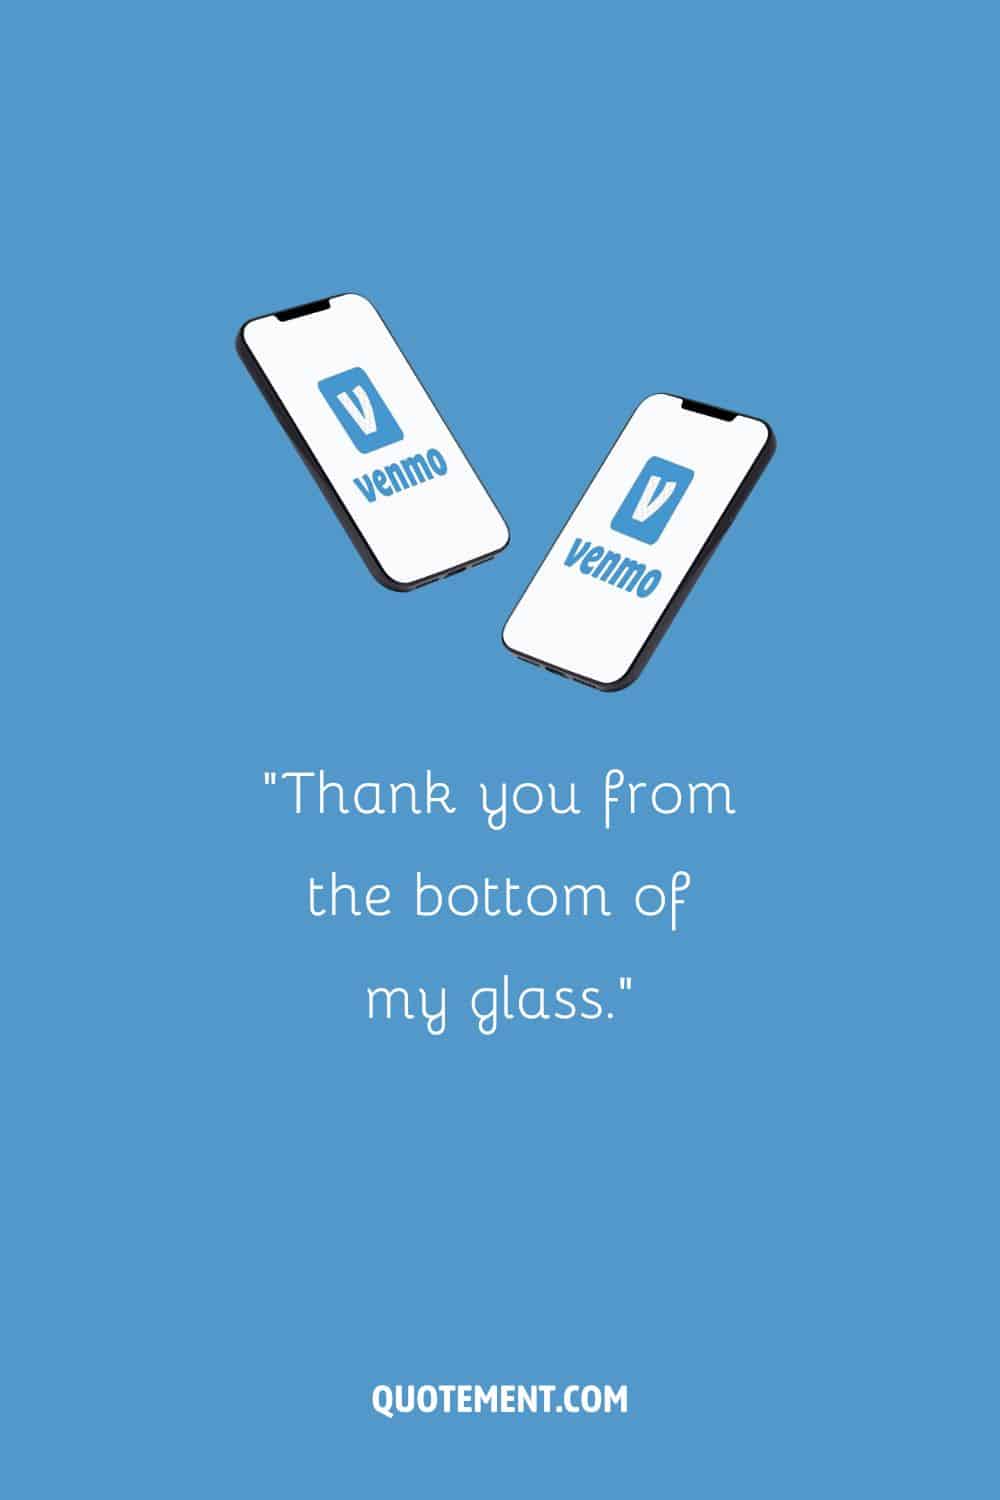 Thank you from the bottom of my glass